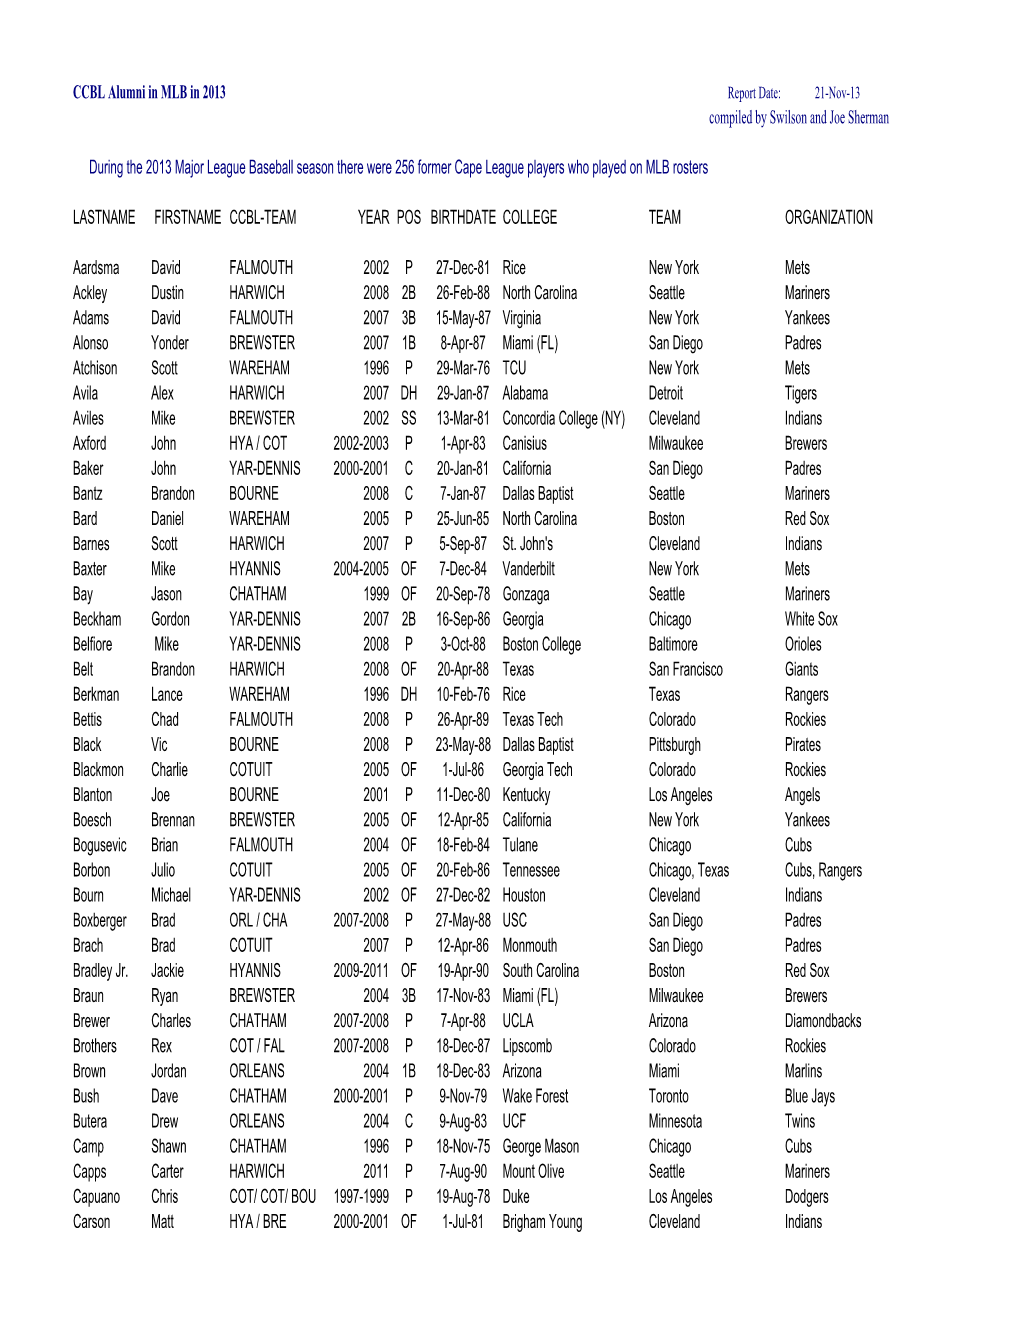 CCBL Alumni in MLB in 2013 Compiled by Swilson and Joe